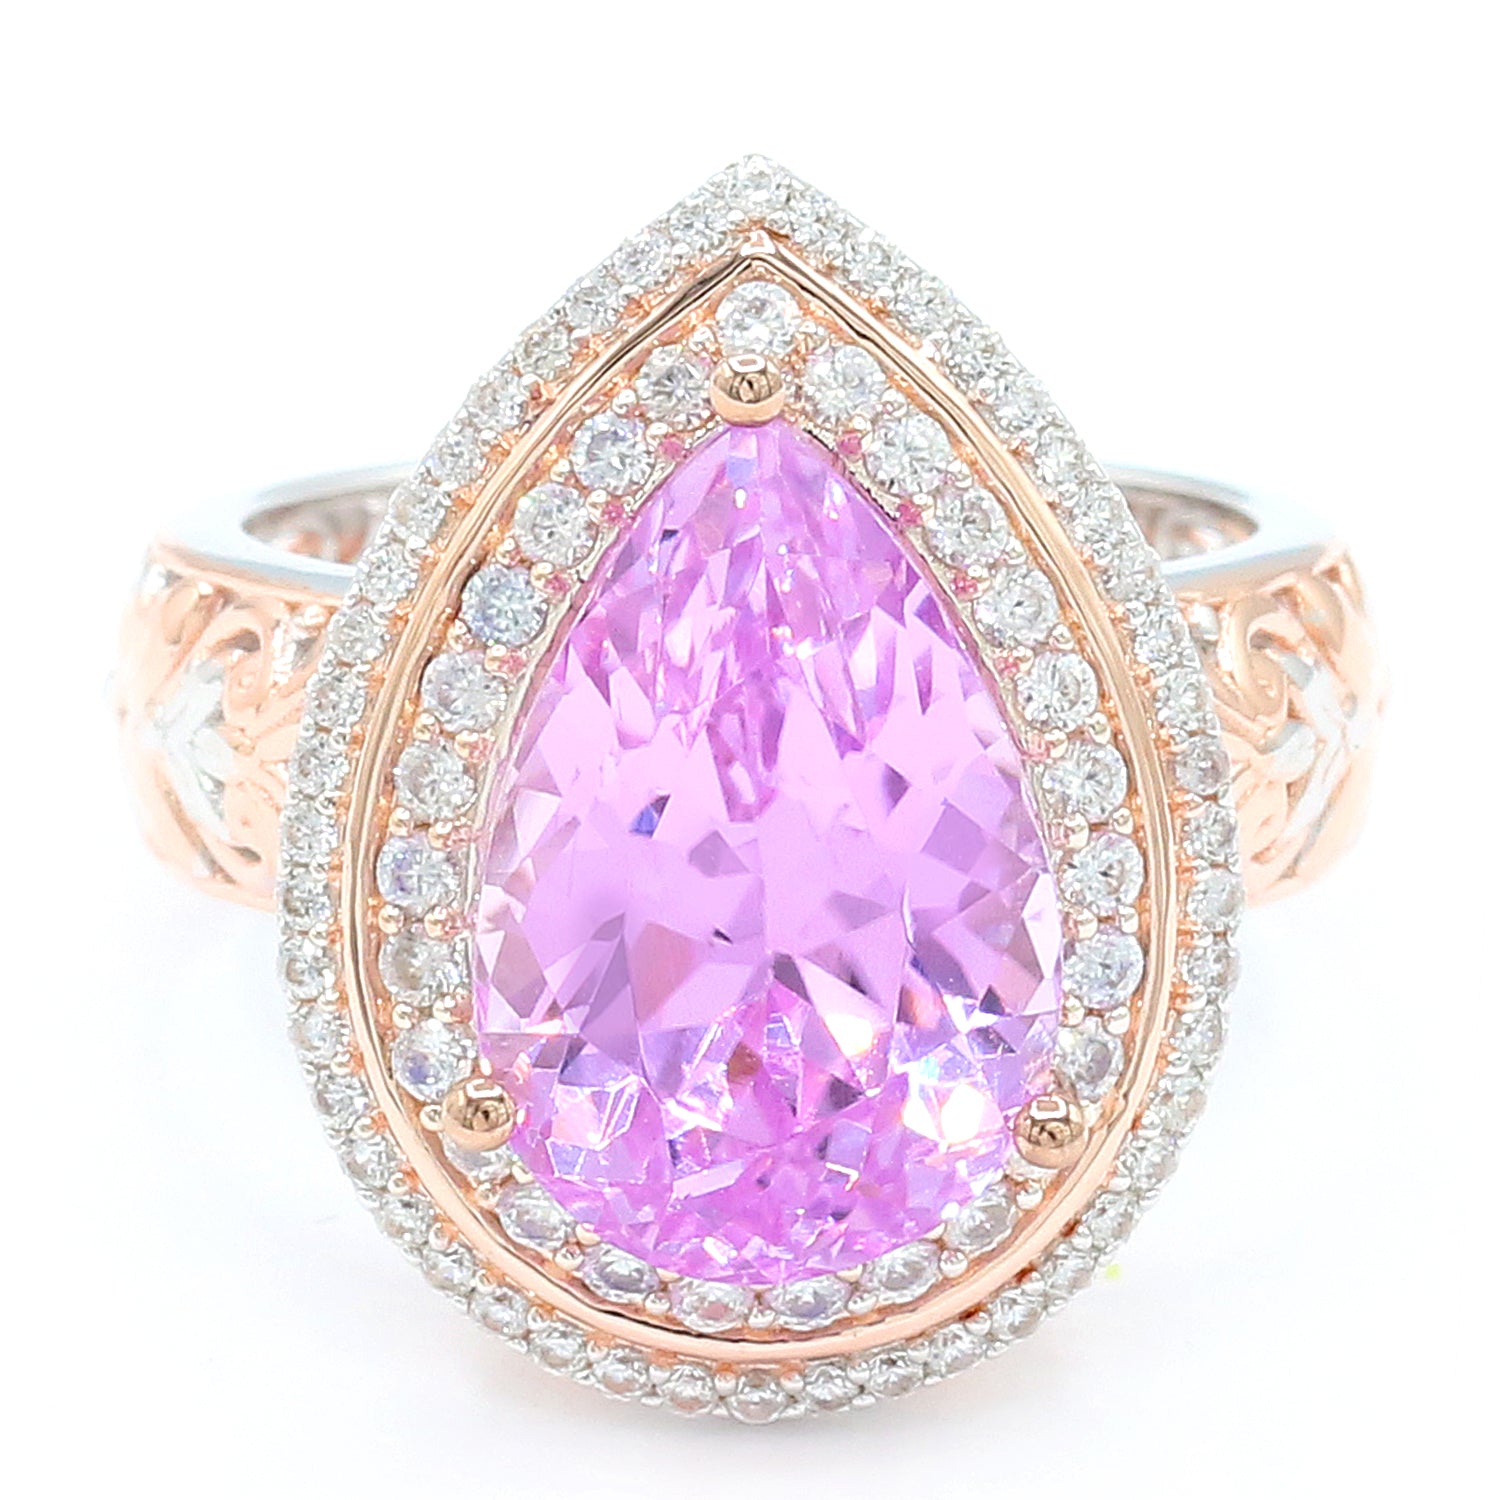 Limited Edition Gems en Vogue Luxe One-of-a-Kind 10.52ctw Kunzite & White Zircon Double Halo Ring